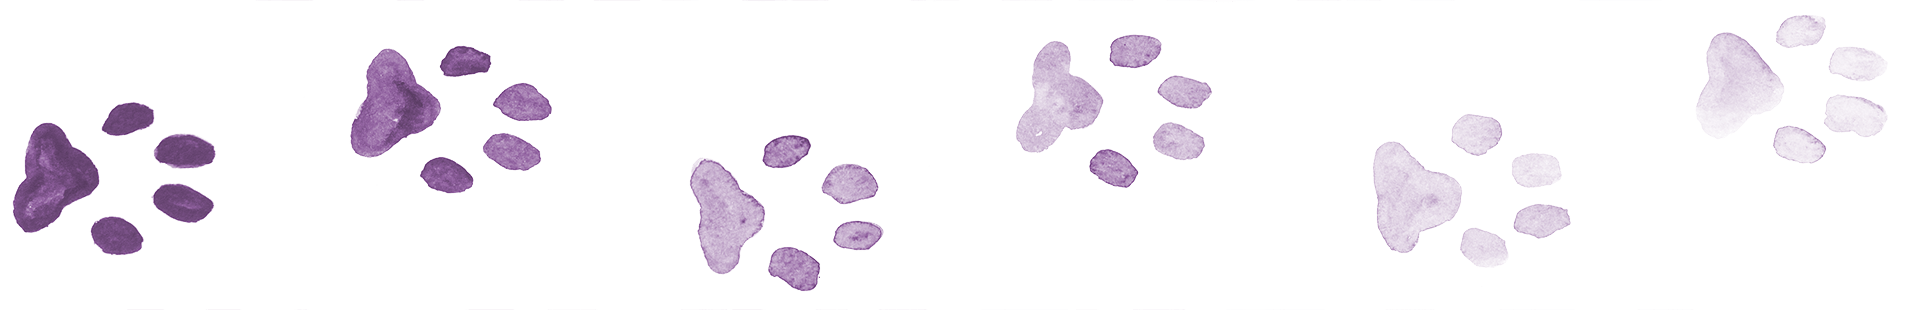 A simple border made up of paw prints painted in purple watercolor.